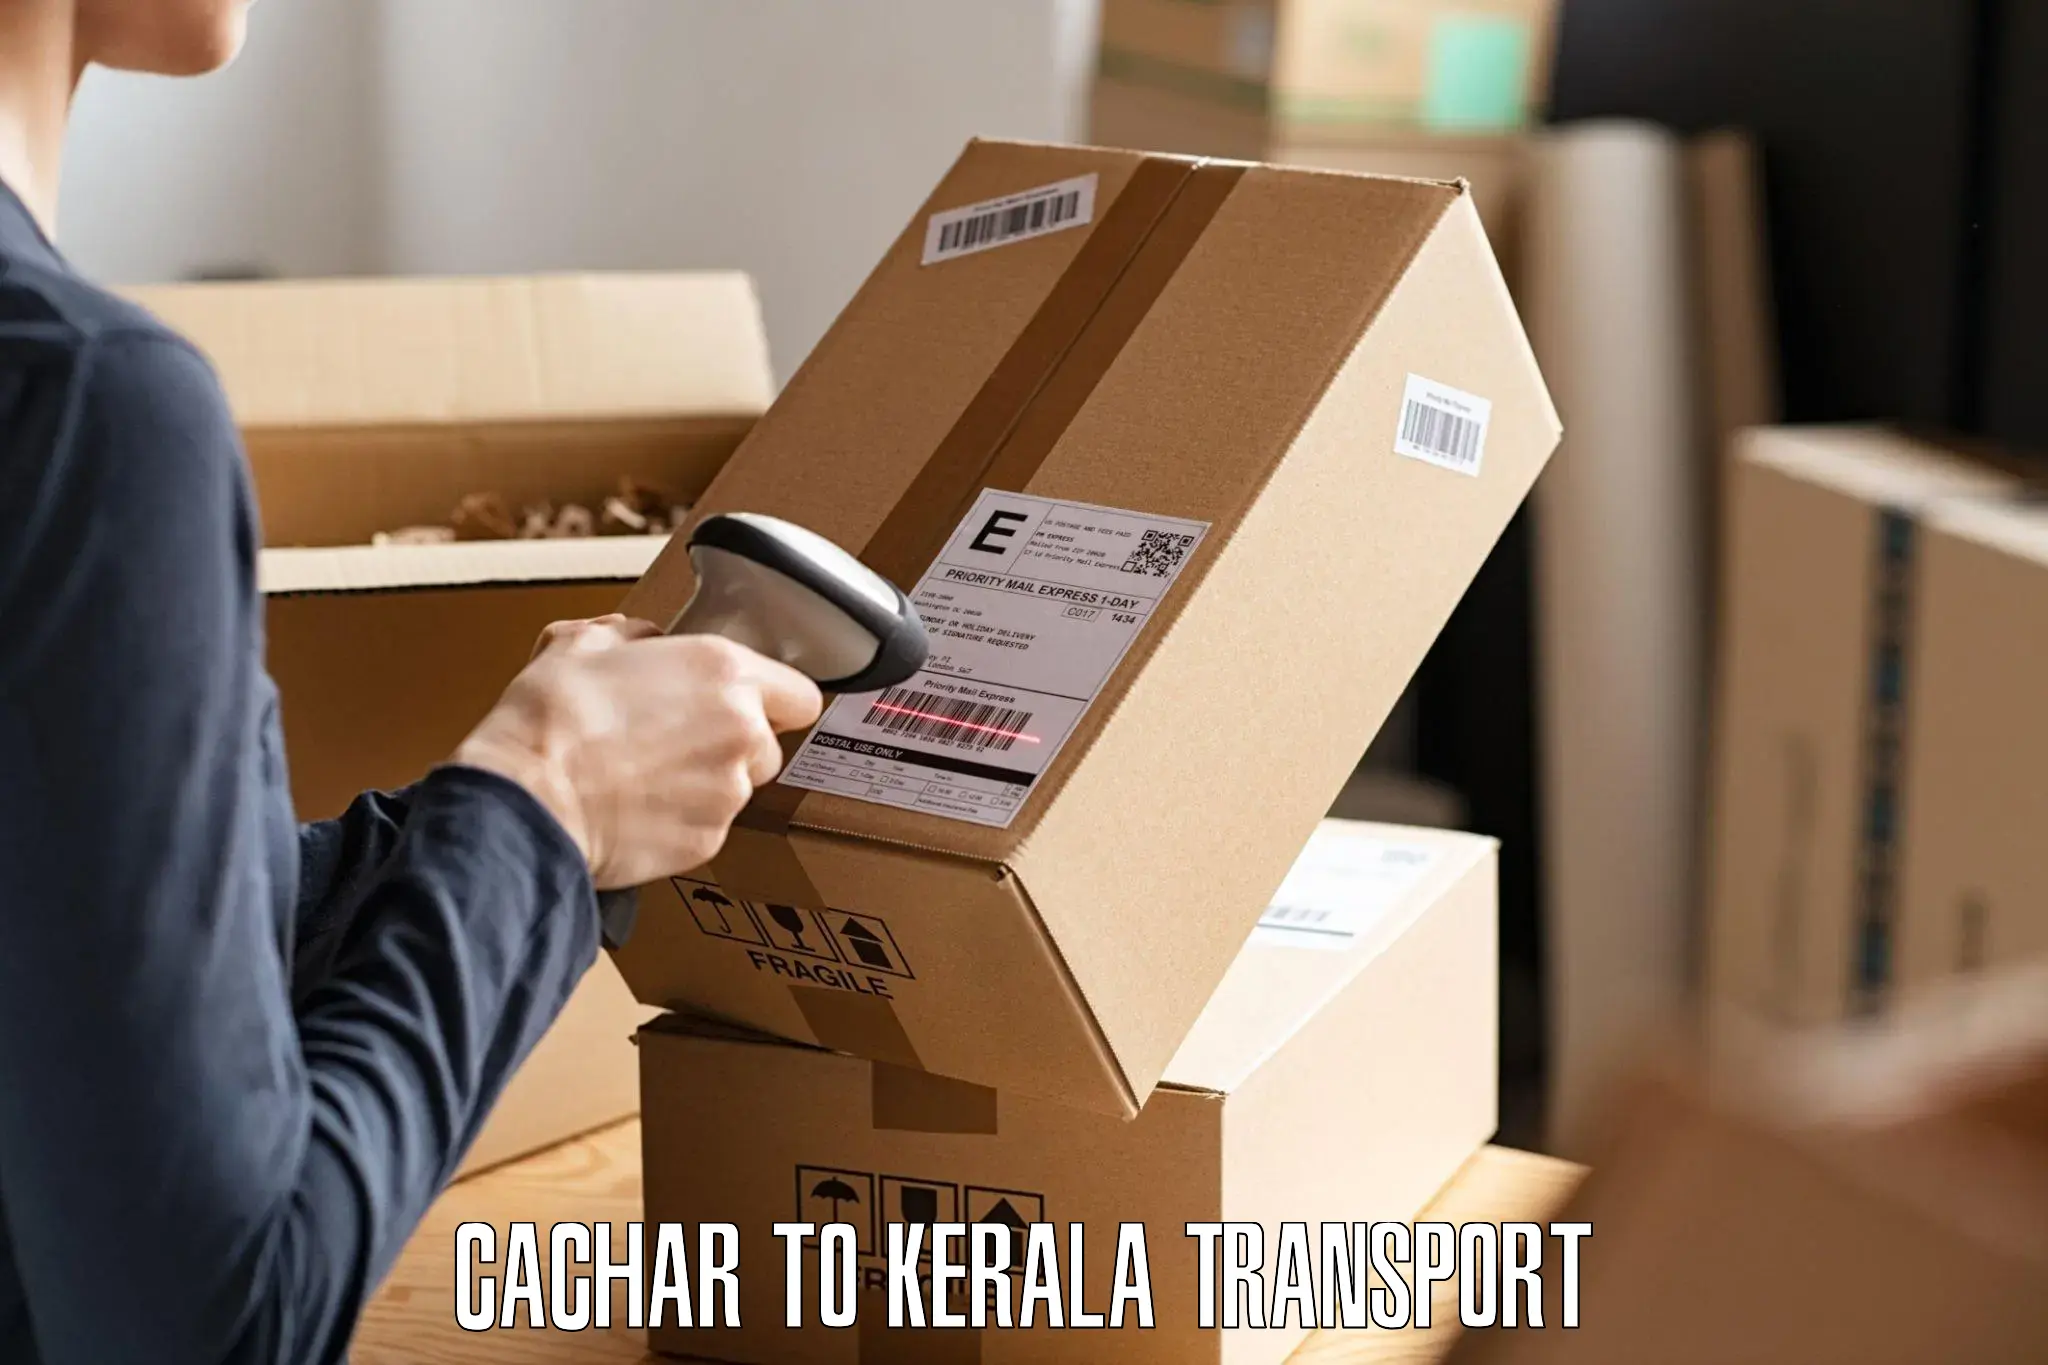 Container transport service Cachar to Edavanna